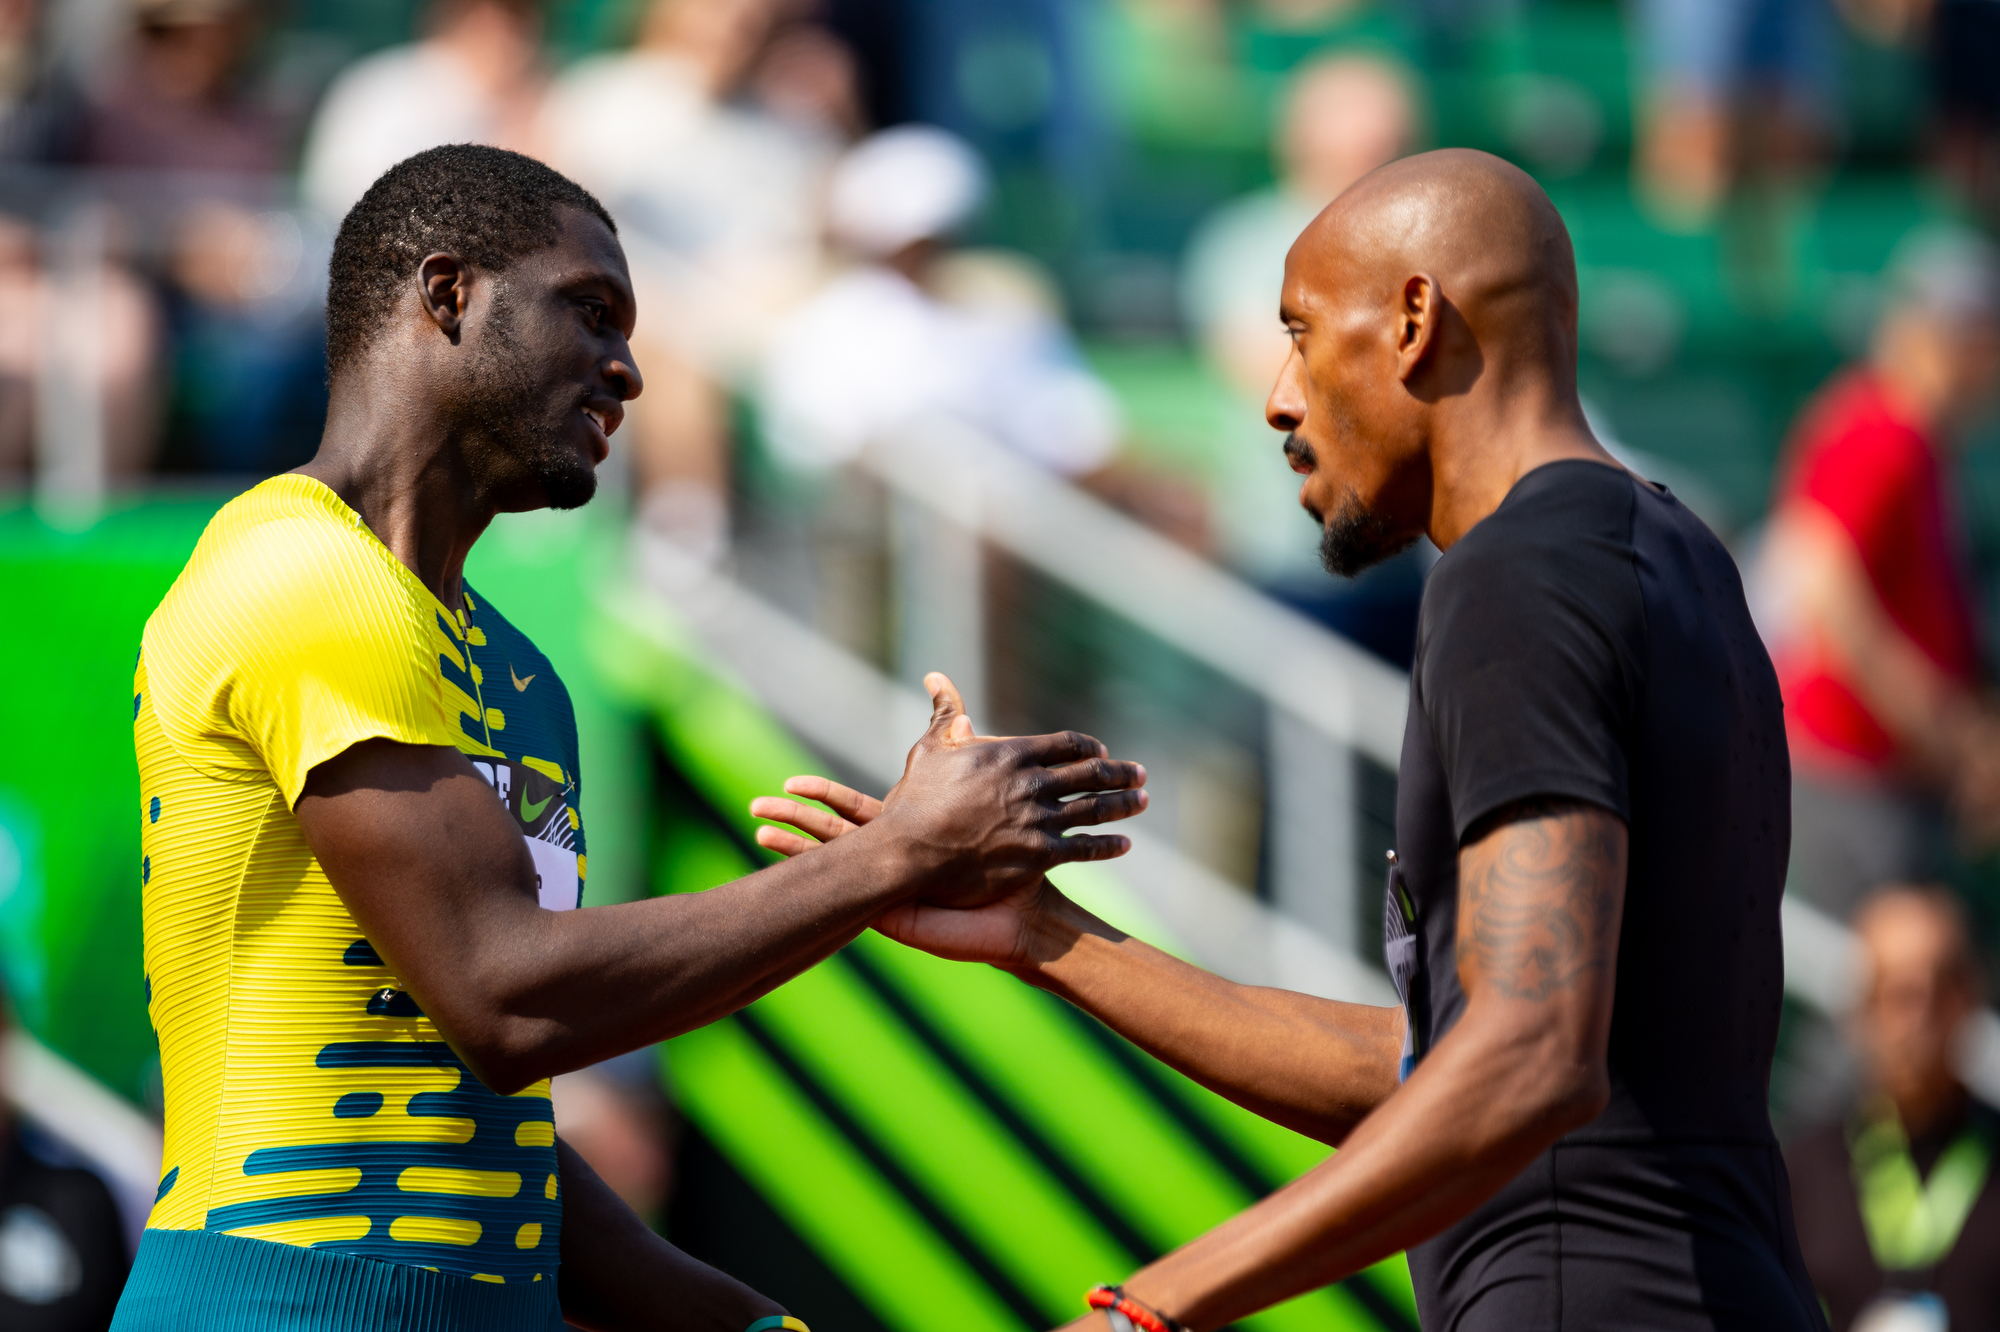 Winner Kirani James (left) of Grenada and third-place finisher Vernon Norwood shake hands after competing in the men’s 400 meters during the Prefontaine Classic track and field meet on Saturday, Sept. 16, 2023, at Hayward Field in Eugene.